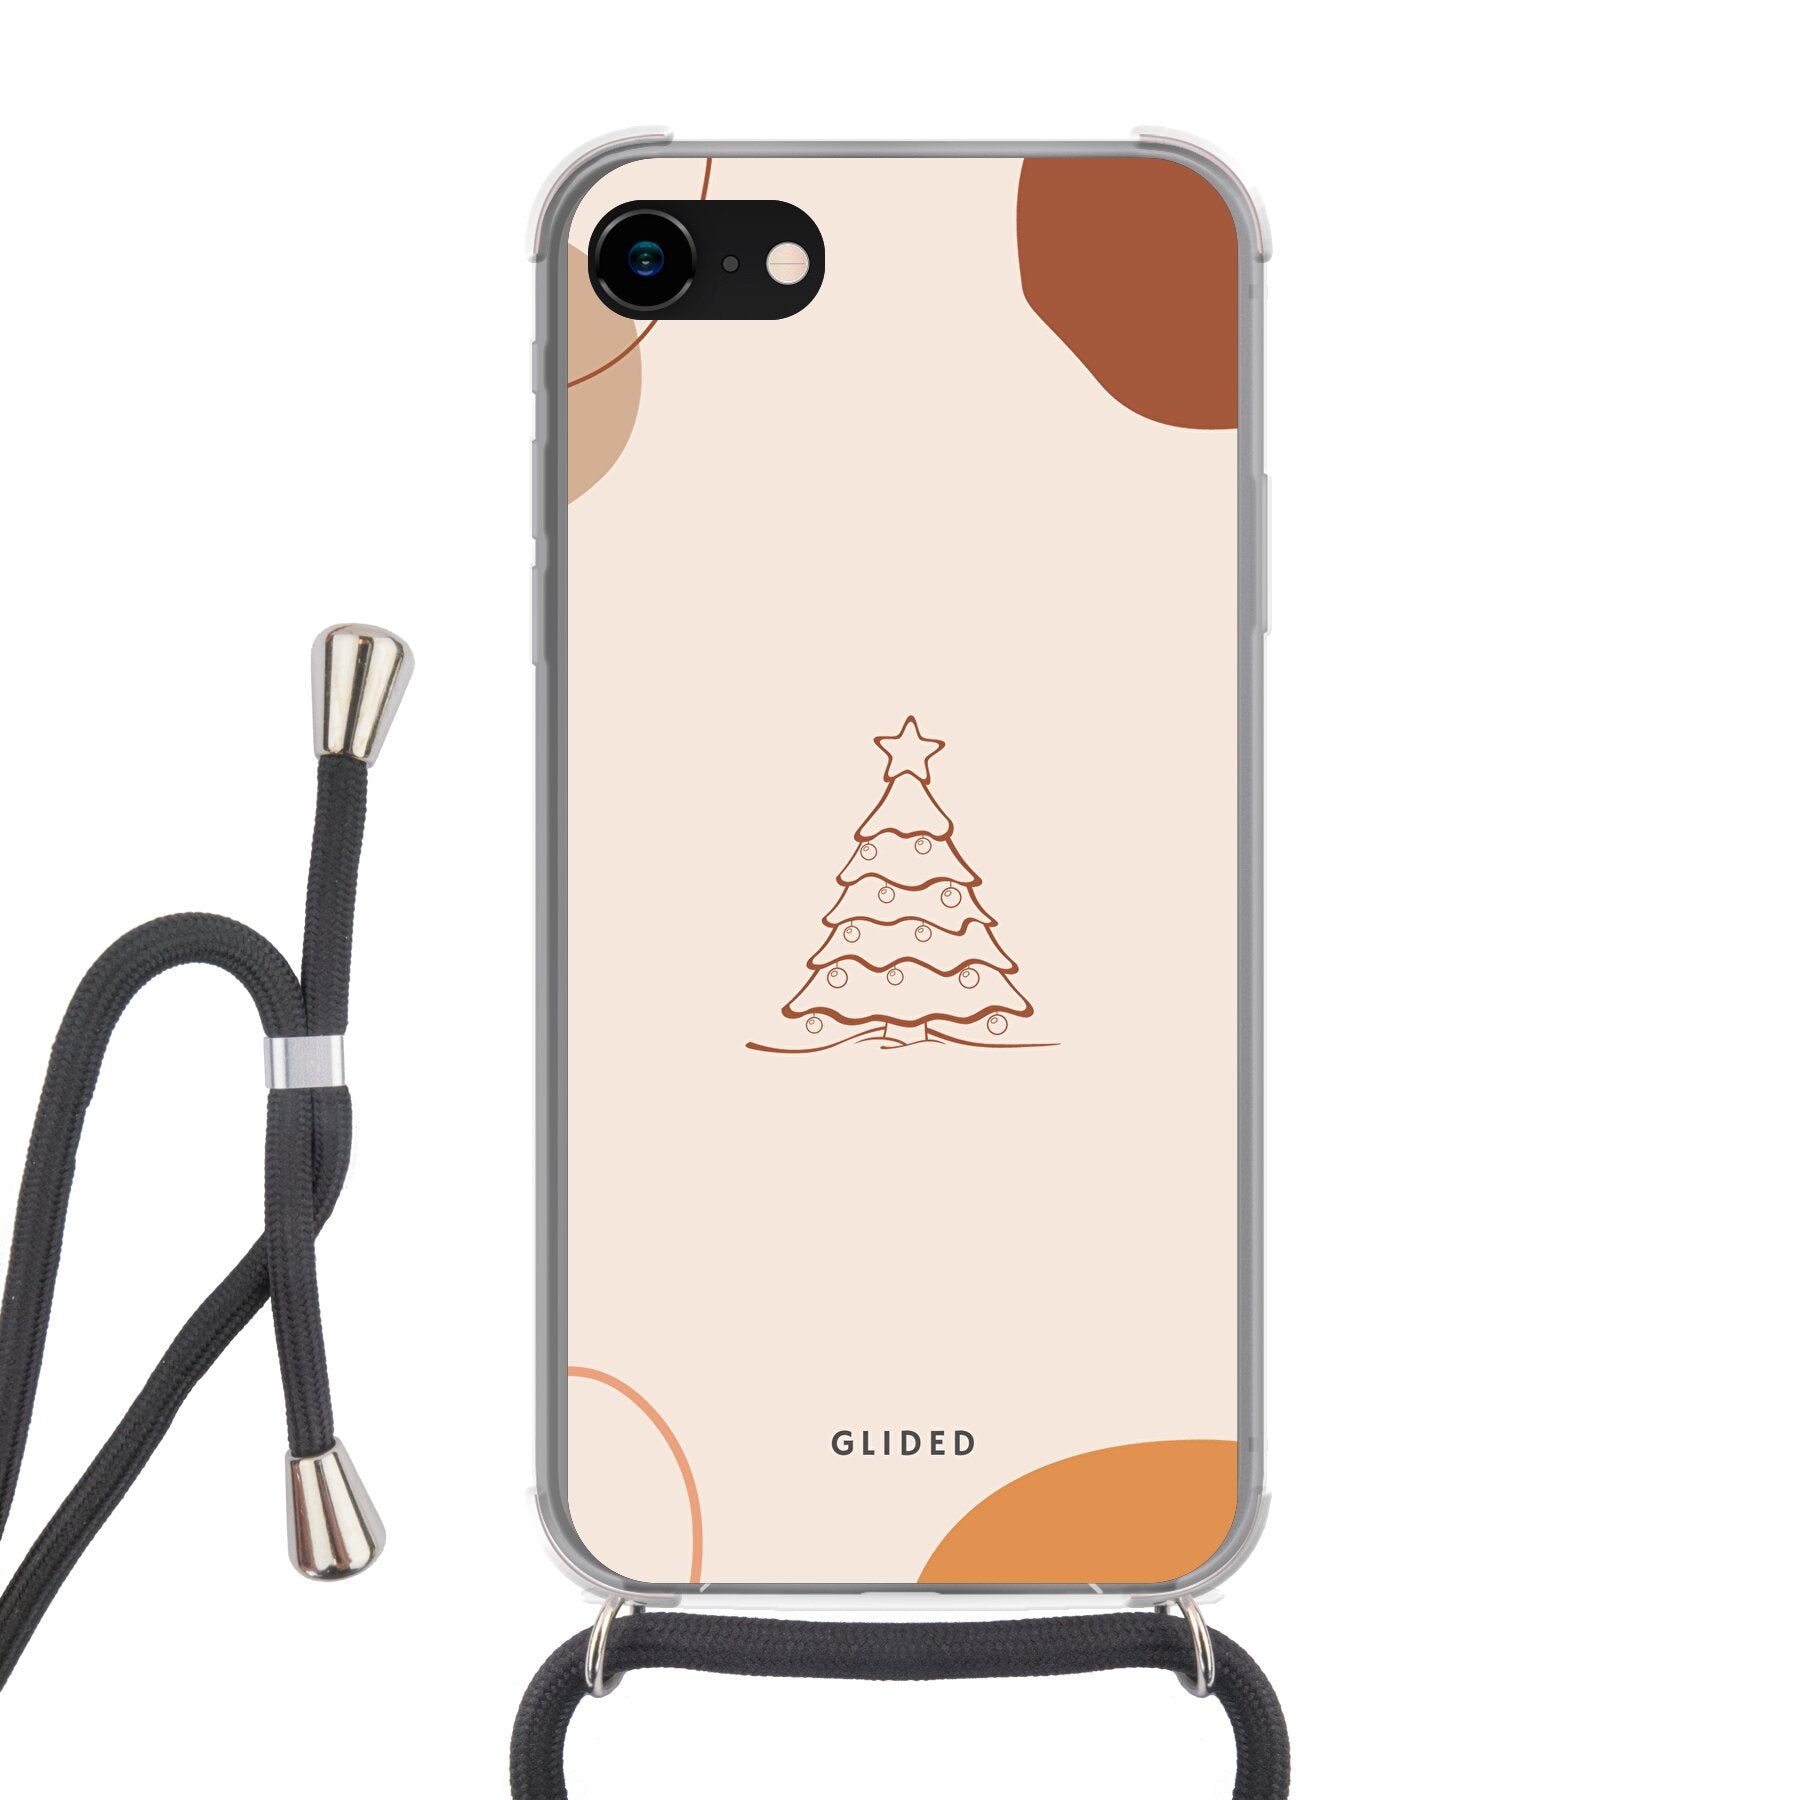 Wintertouch - iPhone 8 Handyhülle Crossbody case mit Band